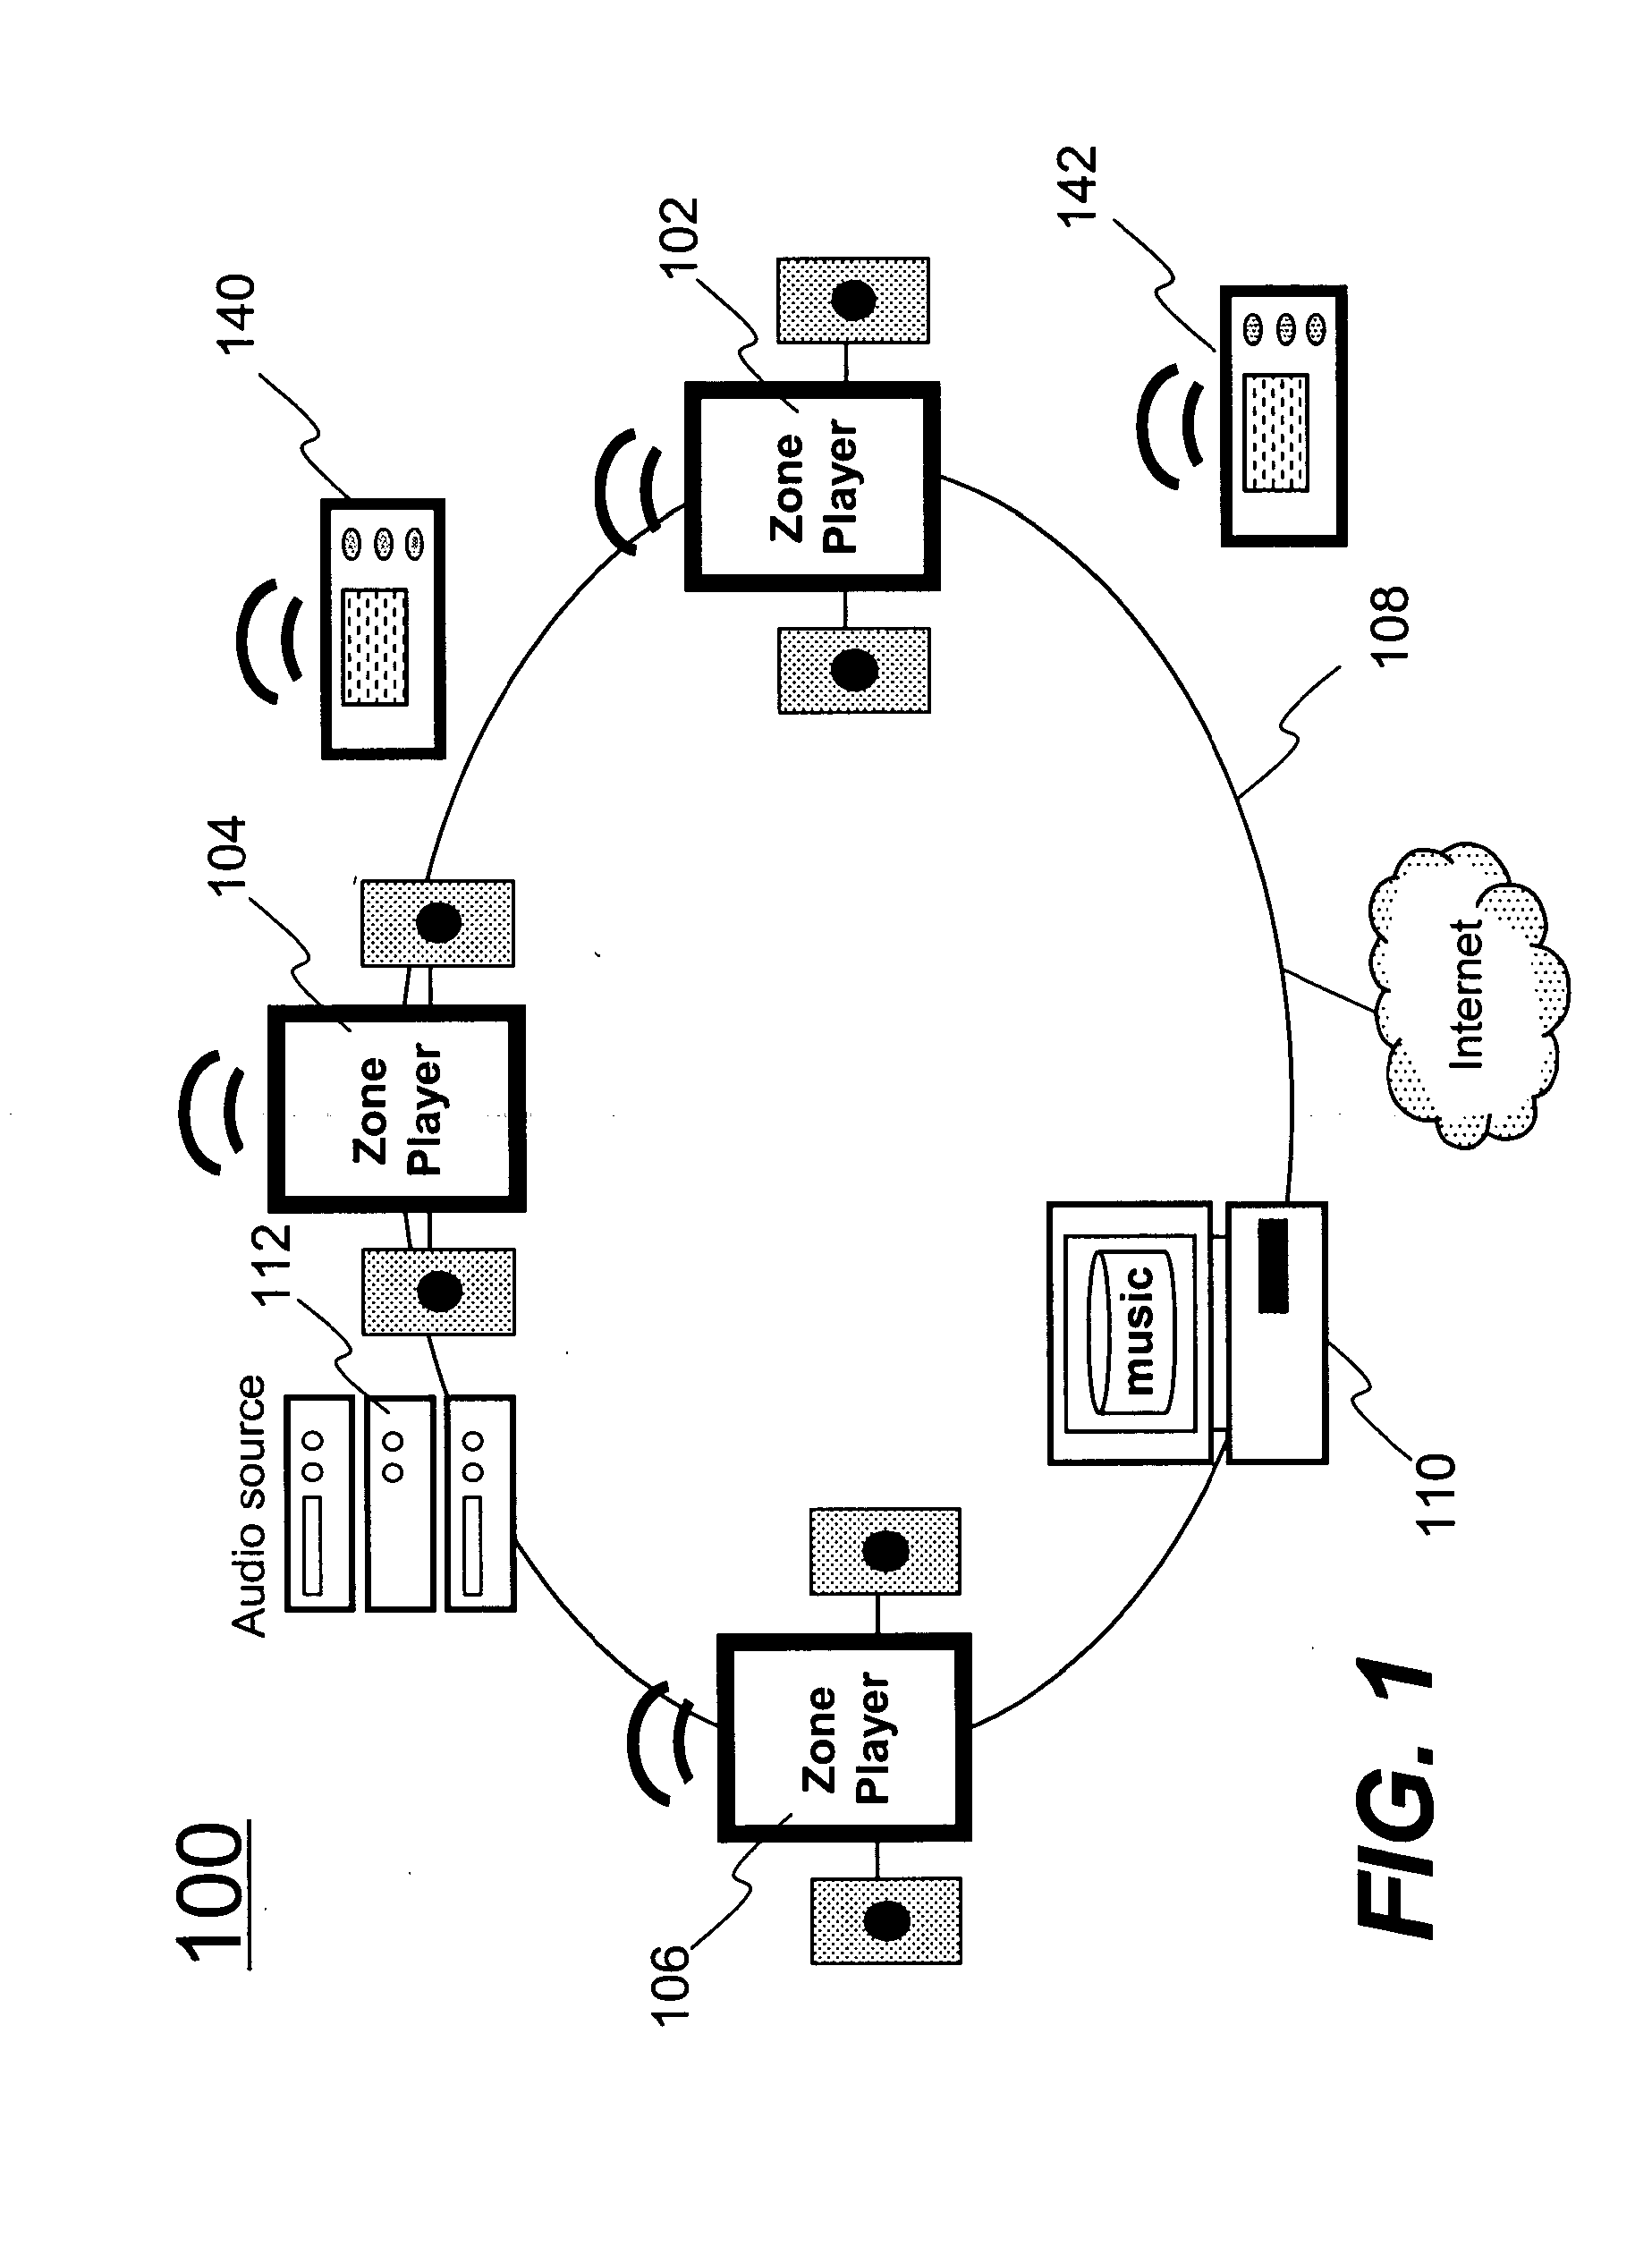 Method and apparatus for displaying single and internet radio items in a play queue